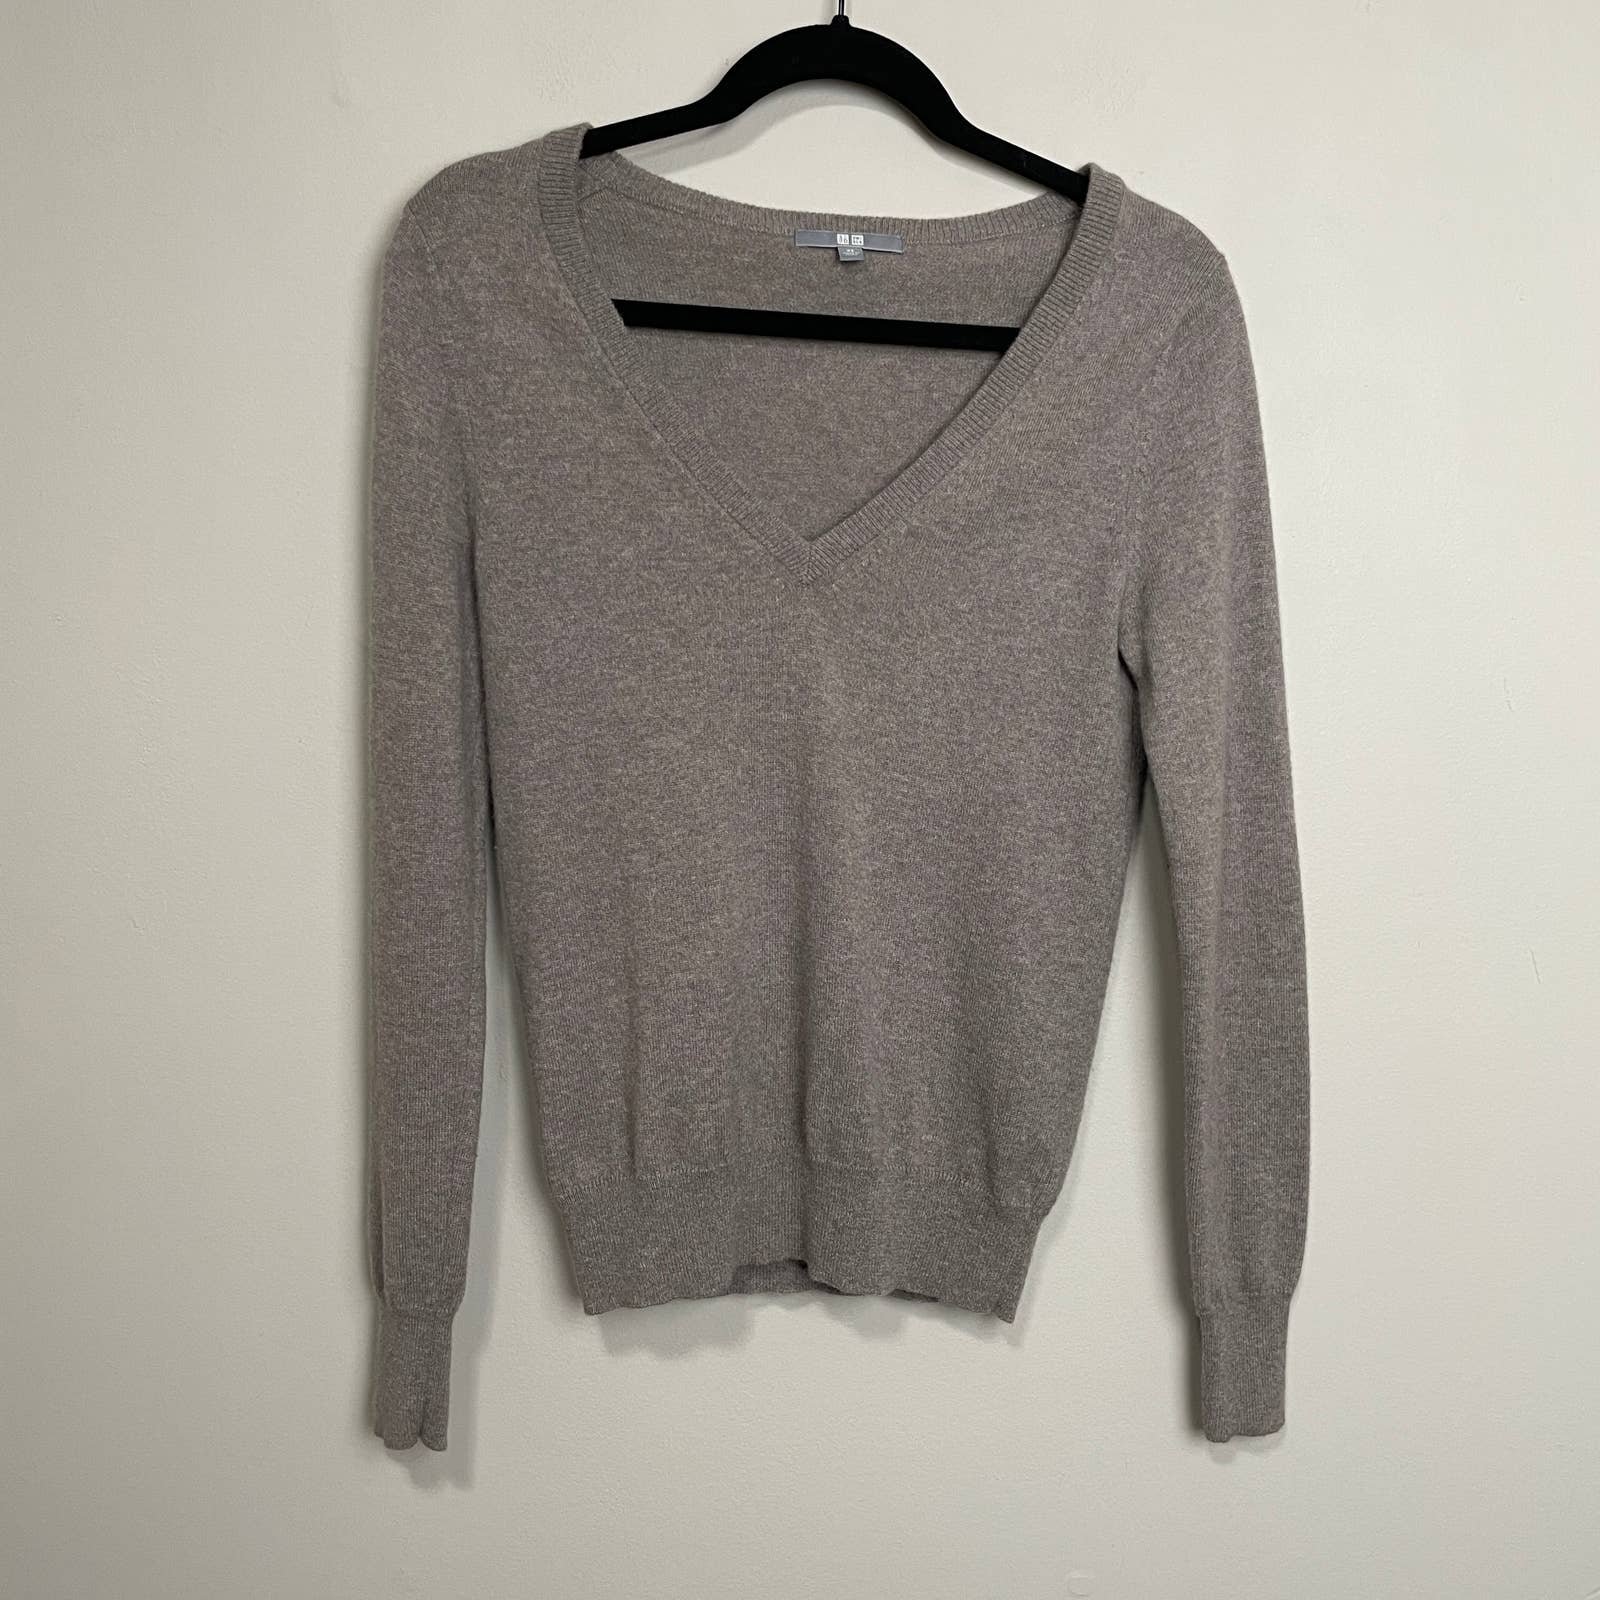 Buy Uniqlo Cashmere V Neck Long Sleeve Pull Over Sweate